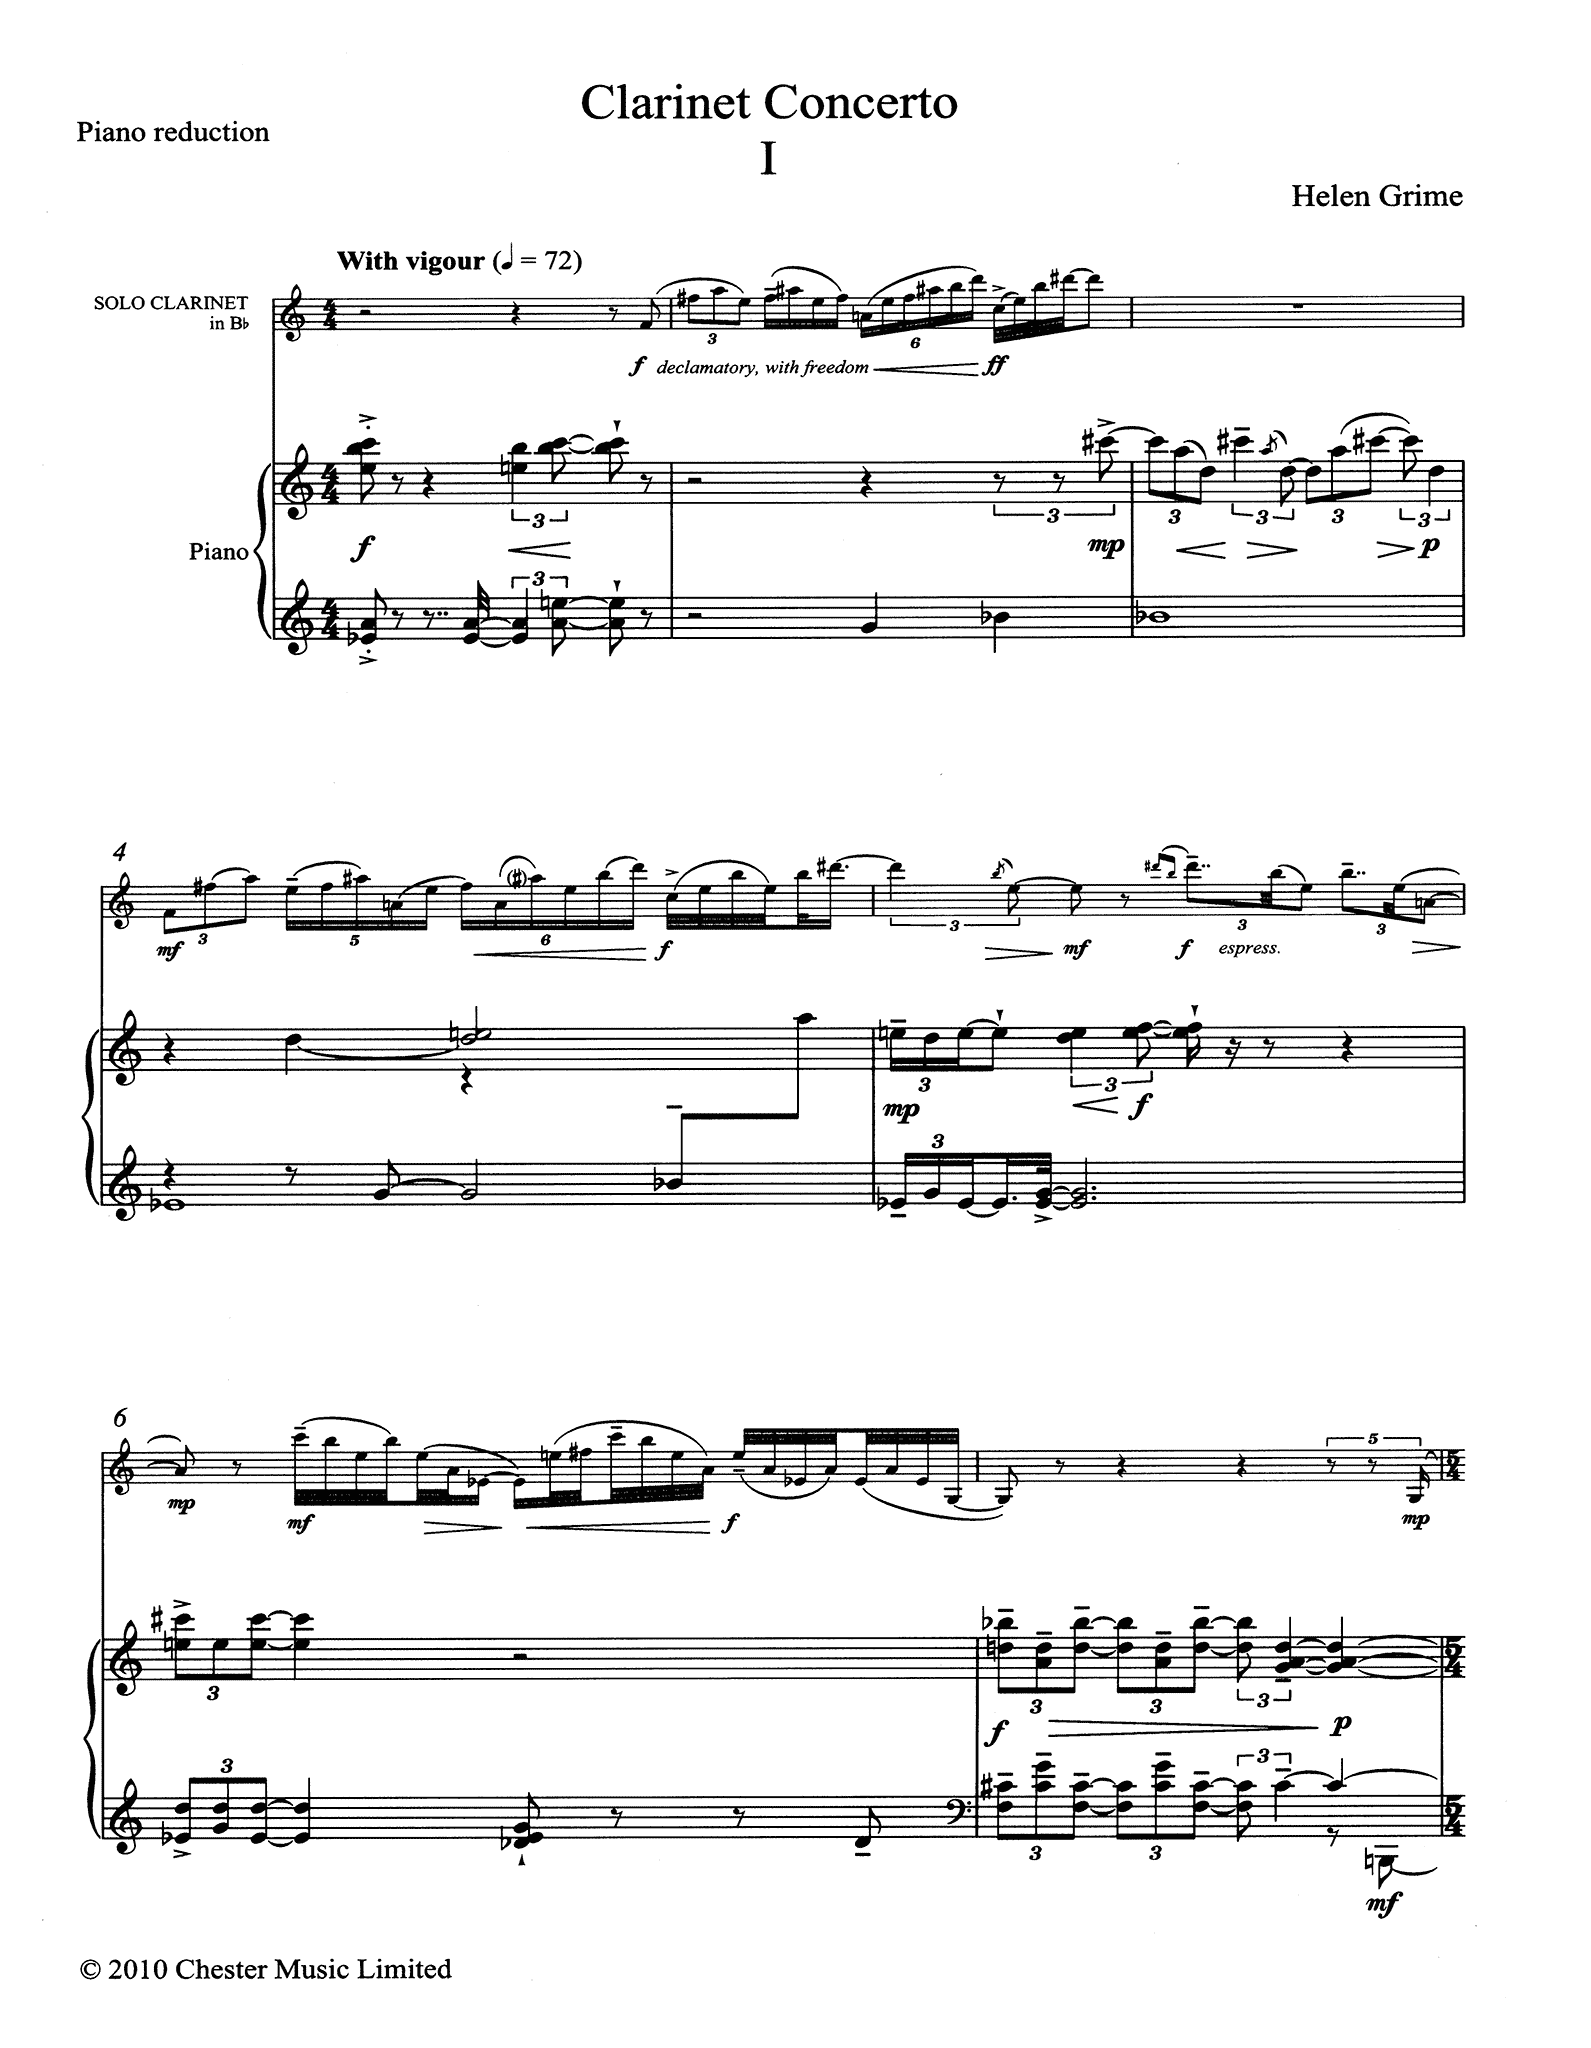 Helen Grime Clarinet Concerto piano reduction - Movement 1